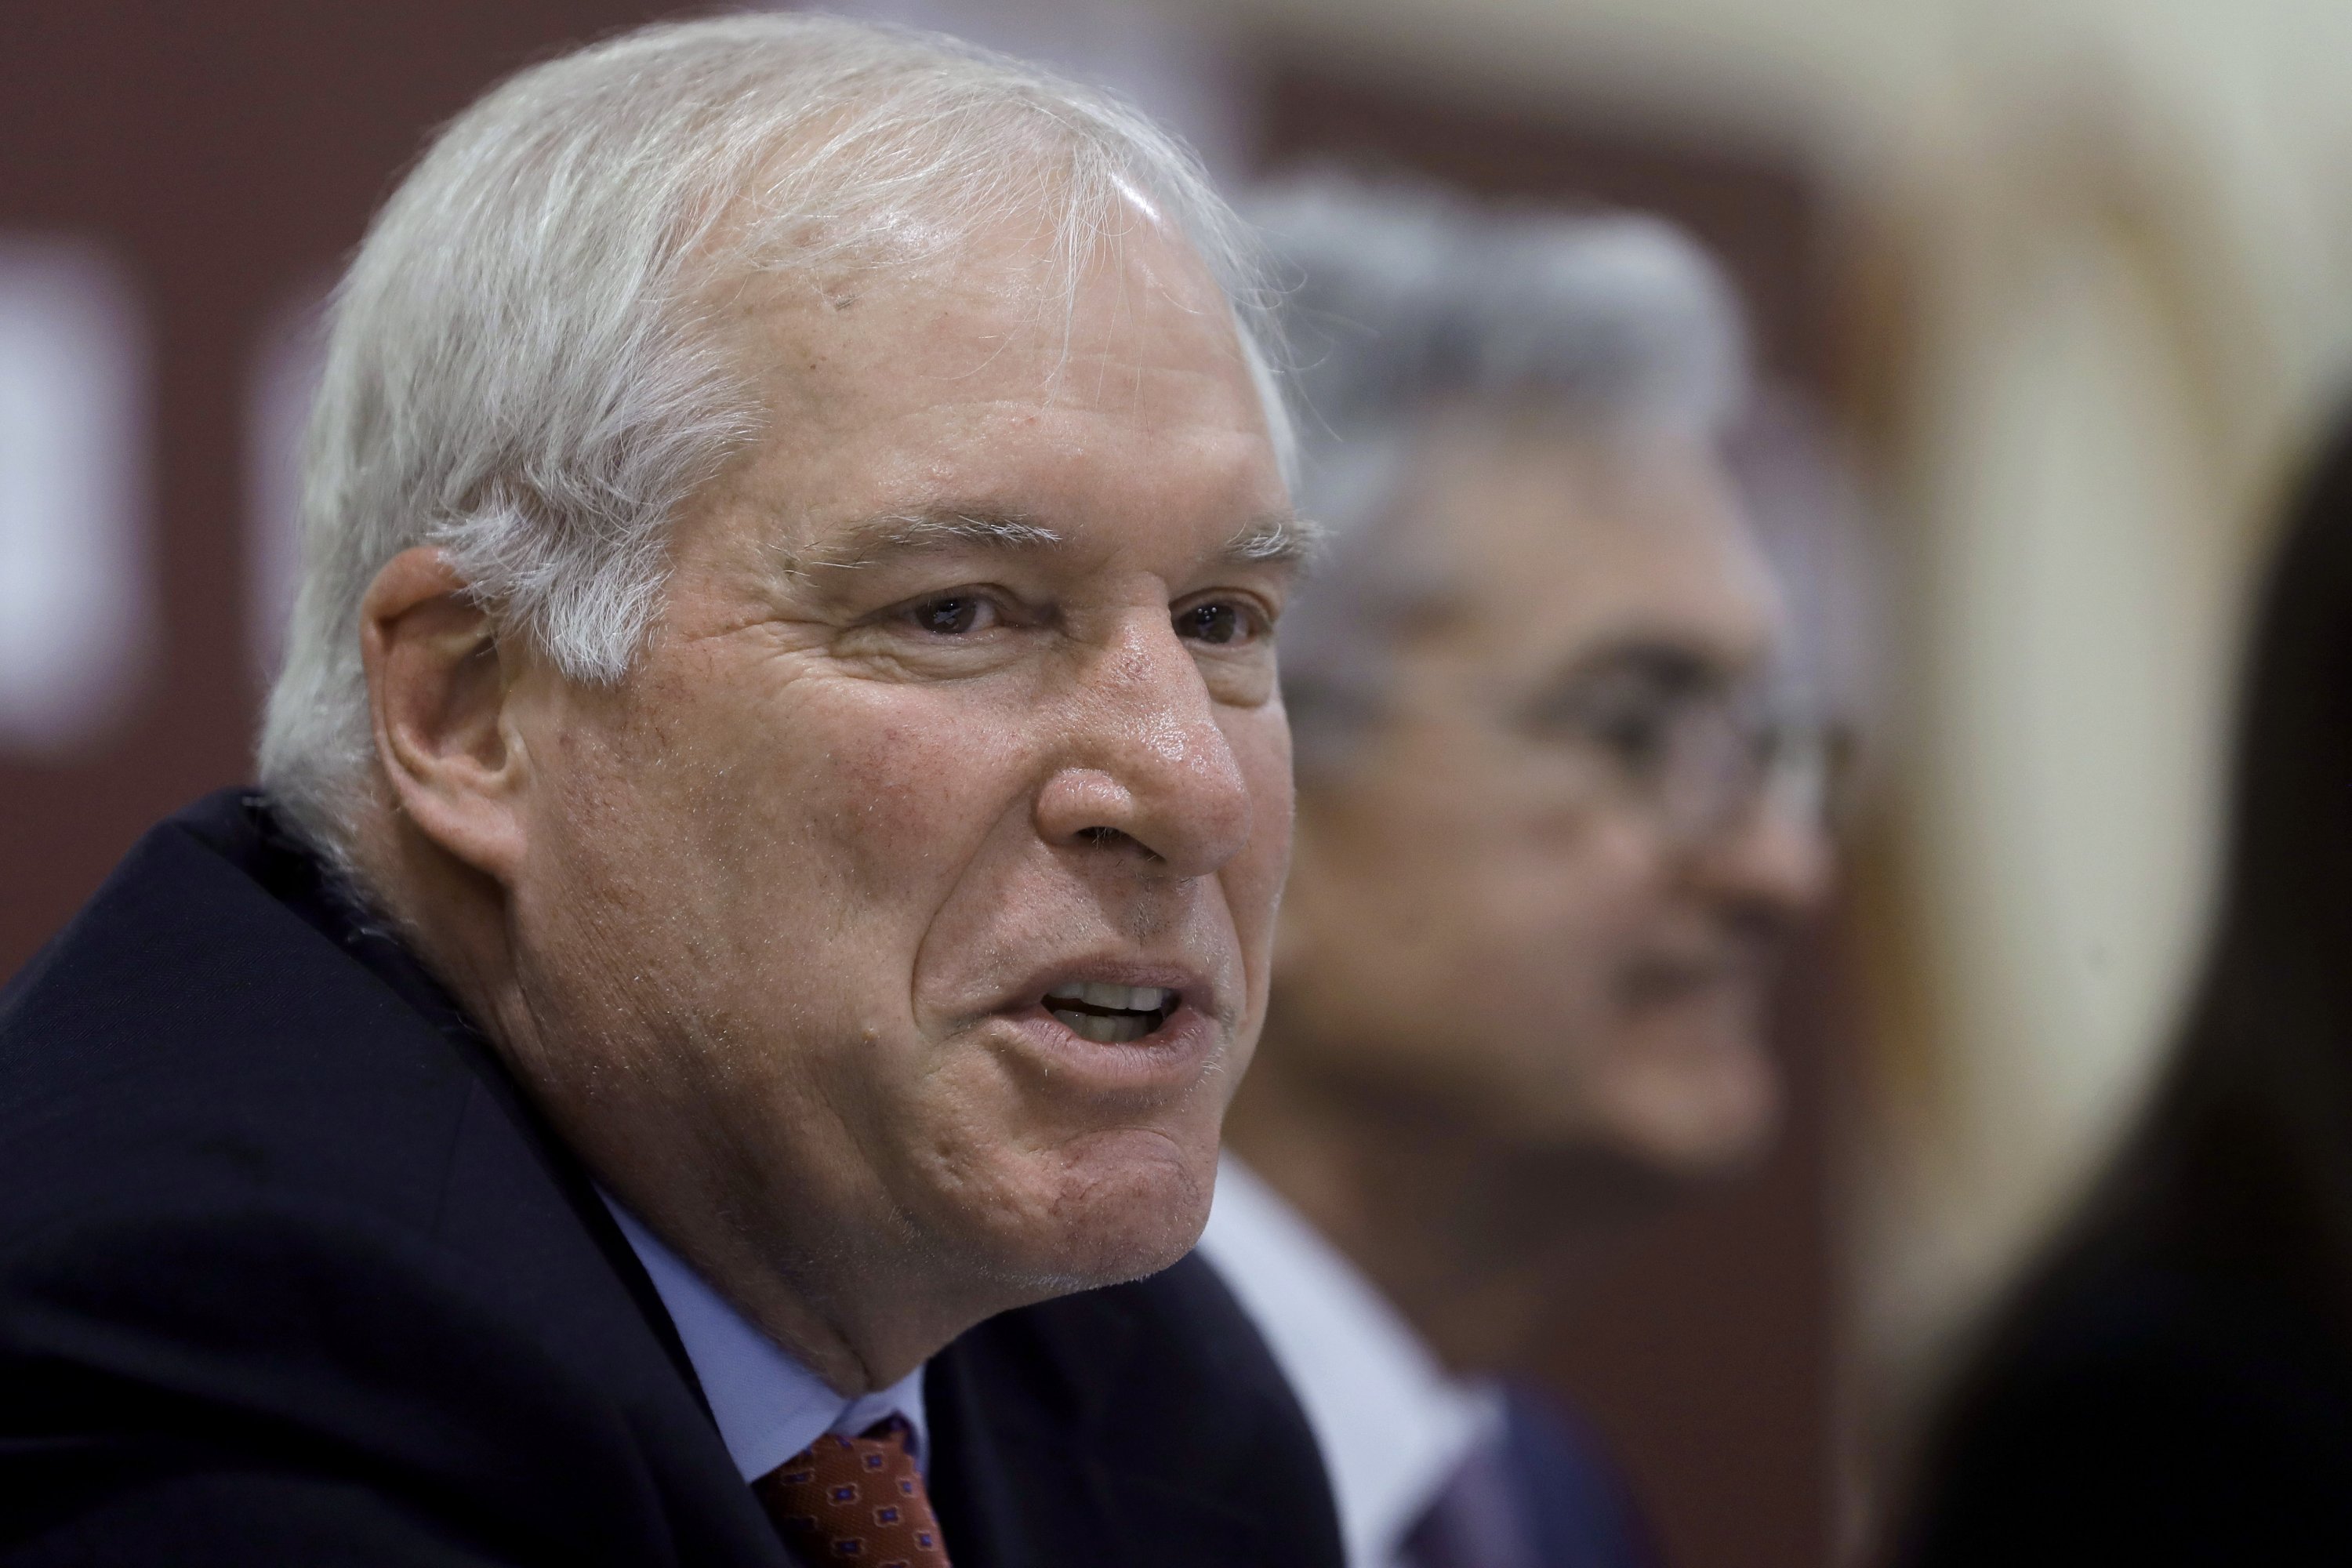 The Federal Reserve Bank of Boston's President and CEO Eric Rosengren speaks during a round table discussion at Silver Lane Elementary School, in East Hartford, Connecticut, U.S., Nov. 25, 2019. (AP Photo) 